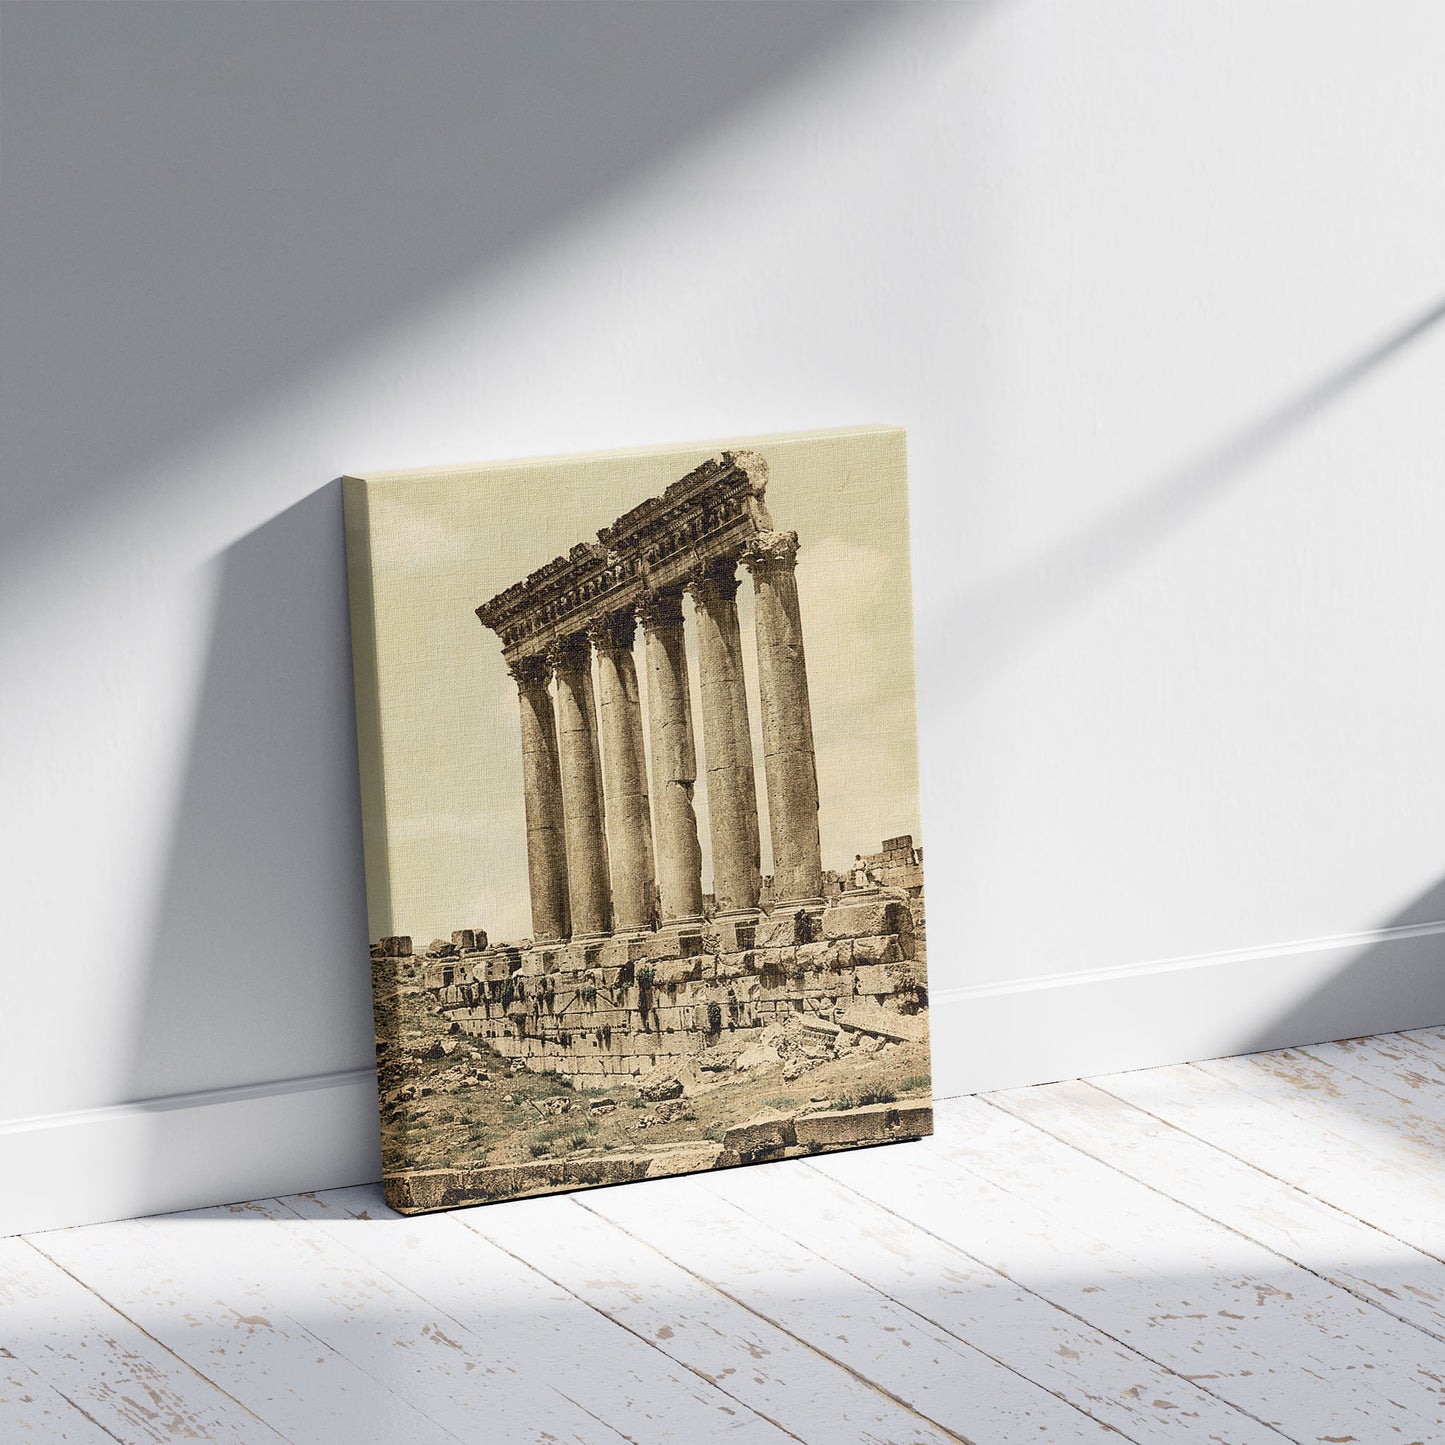 A picture of Temple of the Sun, side view, Baalbek, Holy Land, (i.e., Ba'labakk, Lebanon), a mockup of the print leaning against a wall